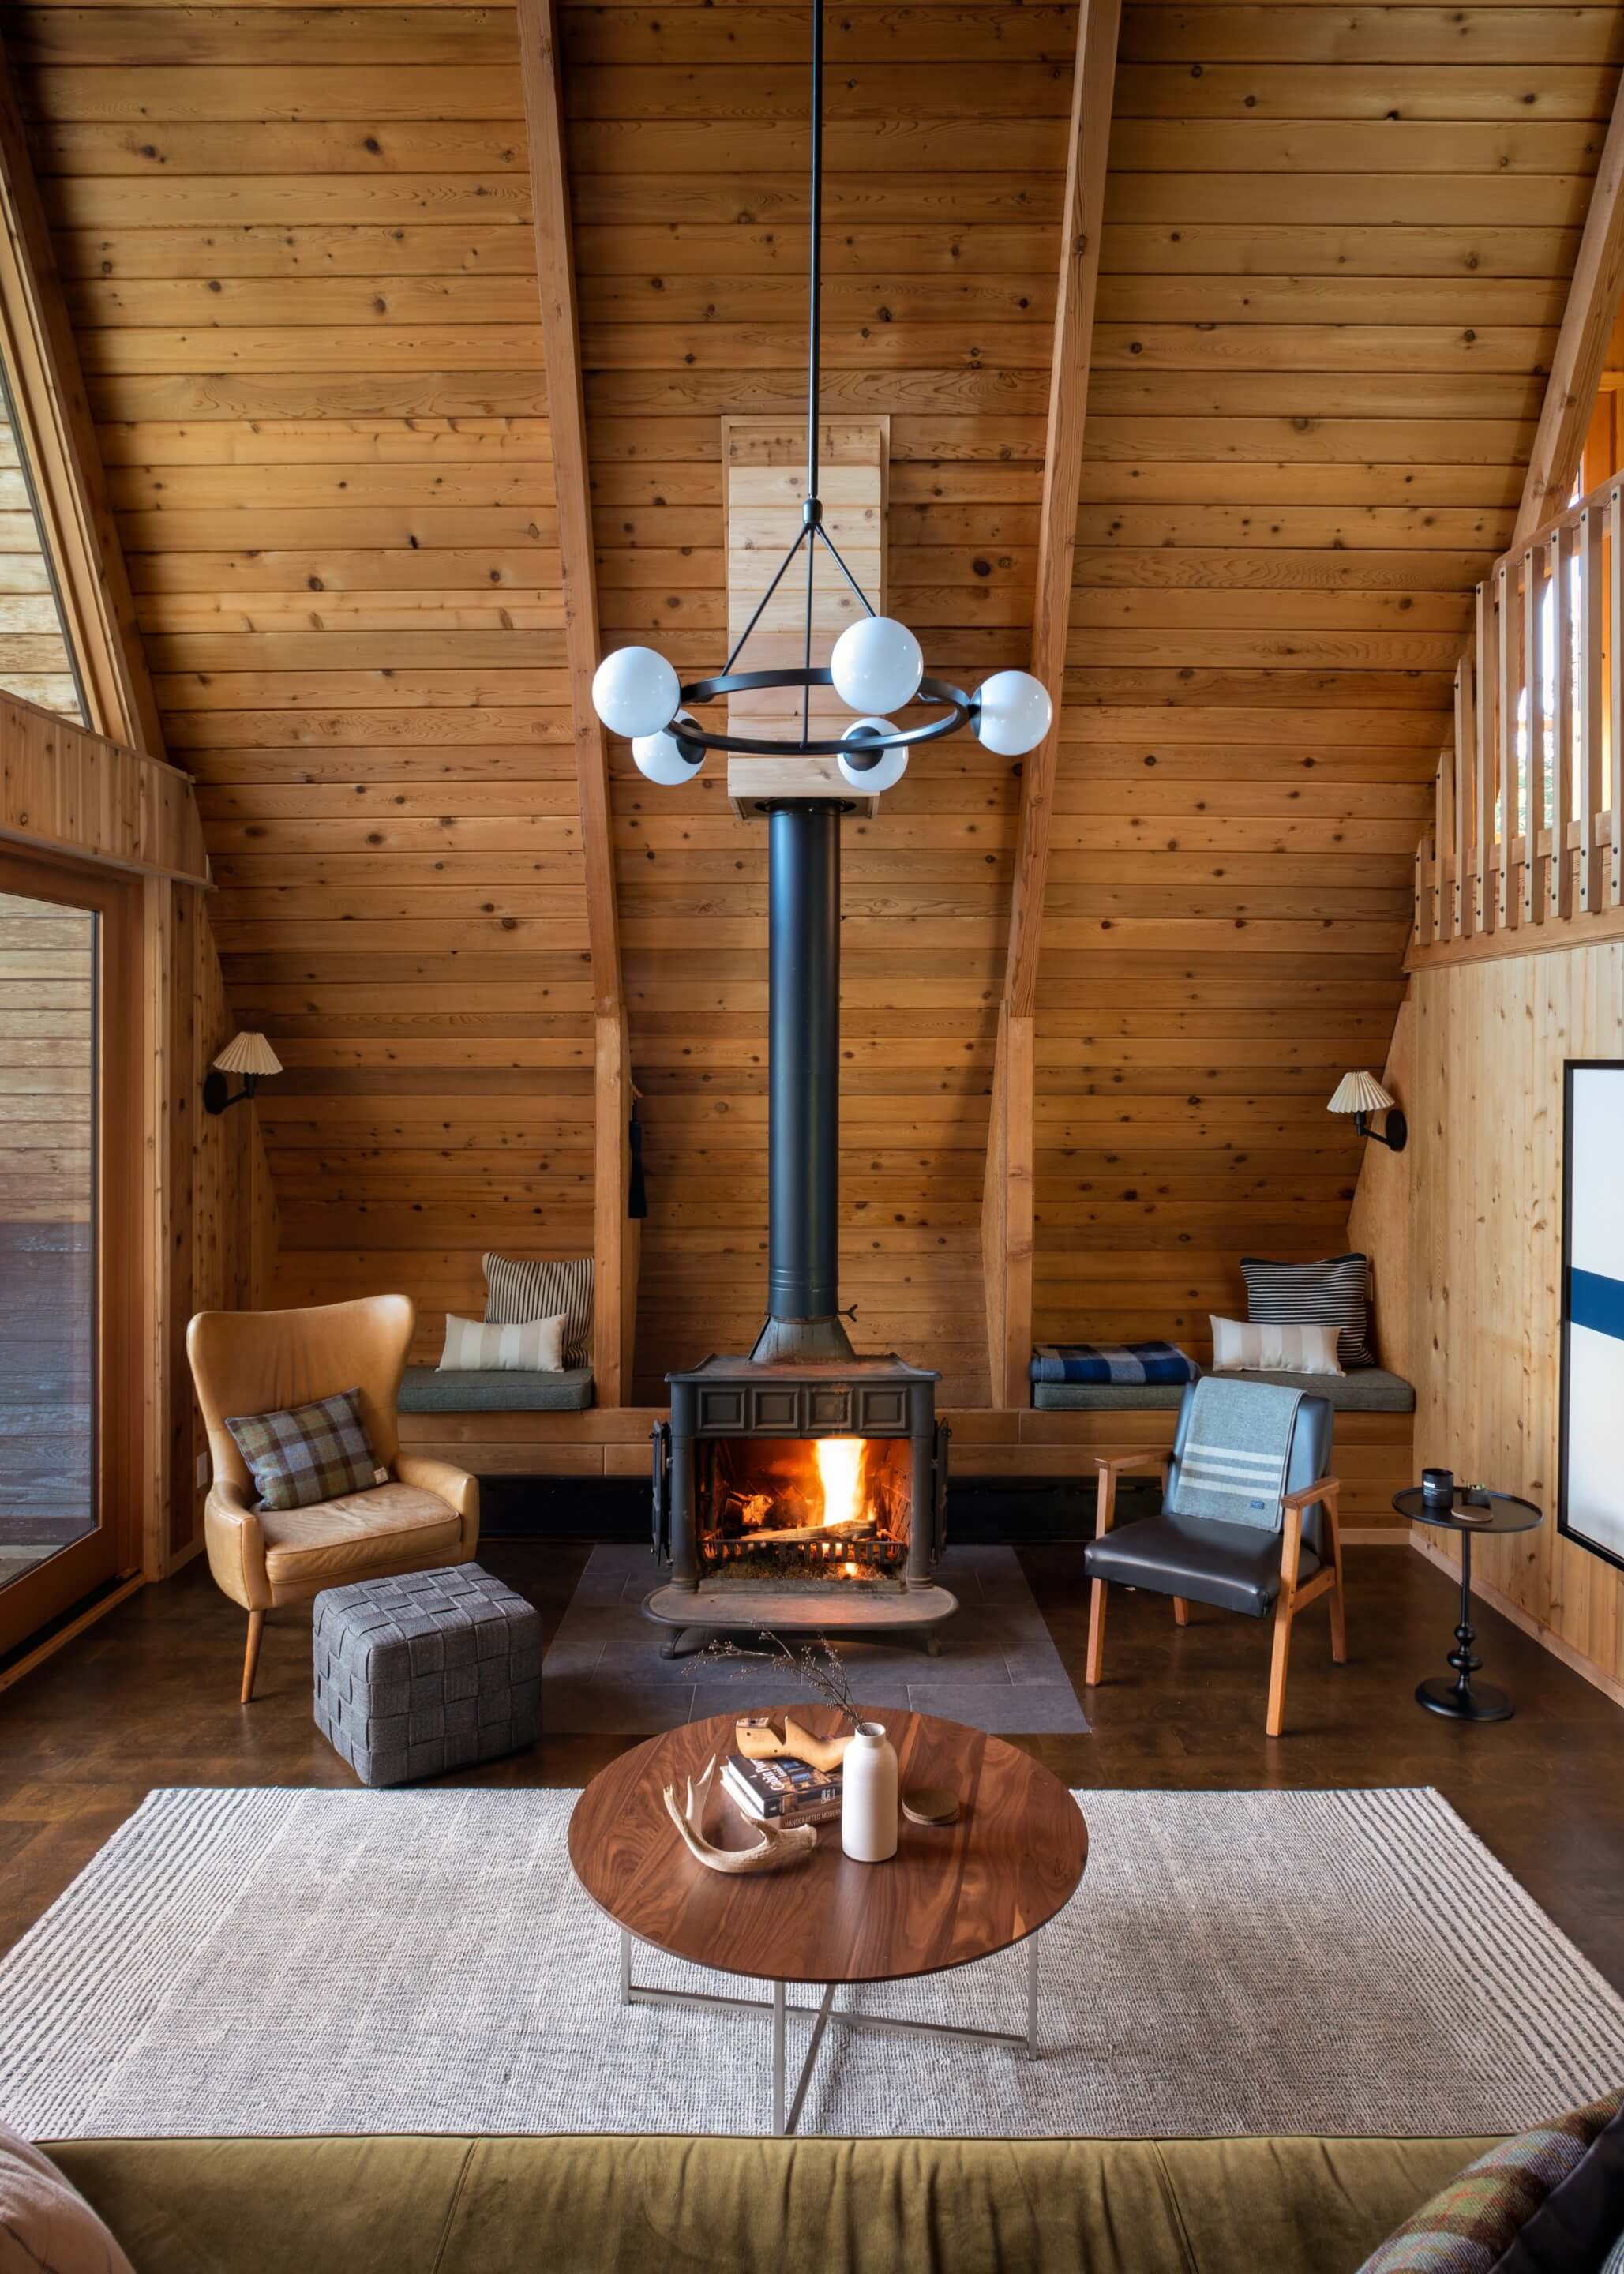 a stove in a cozy, wood-paneled cabin